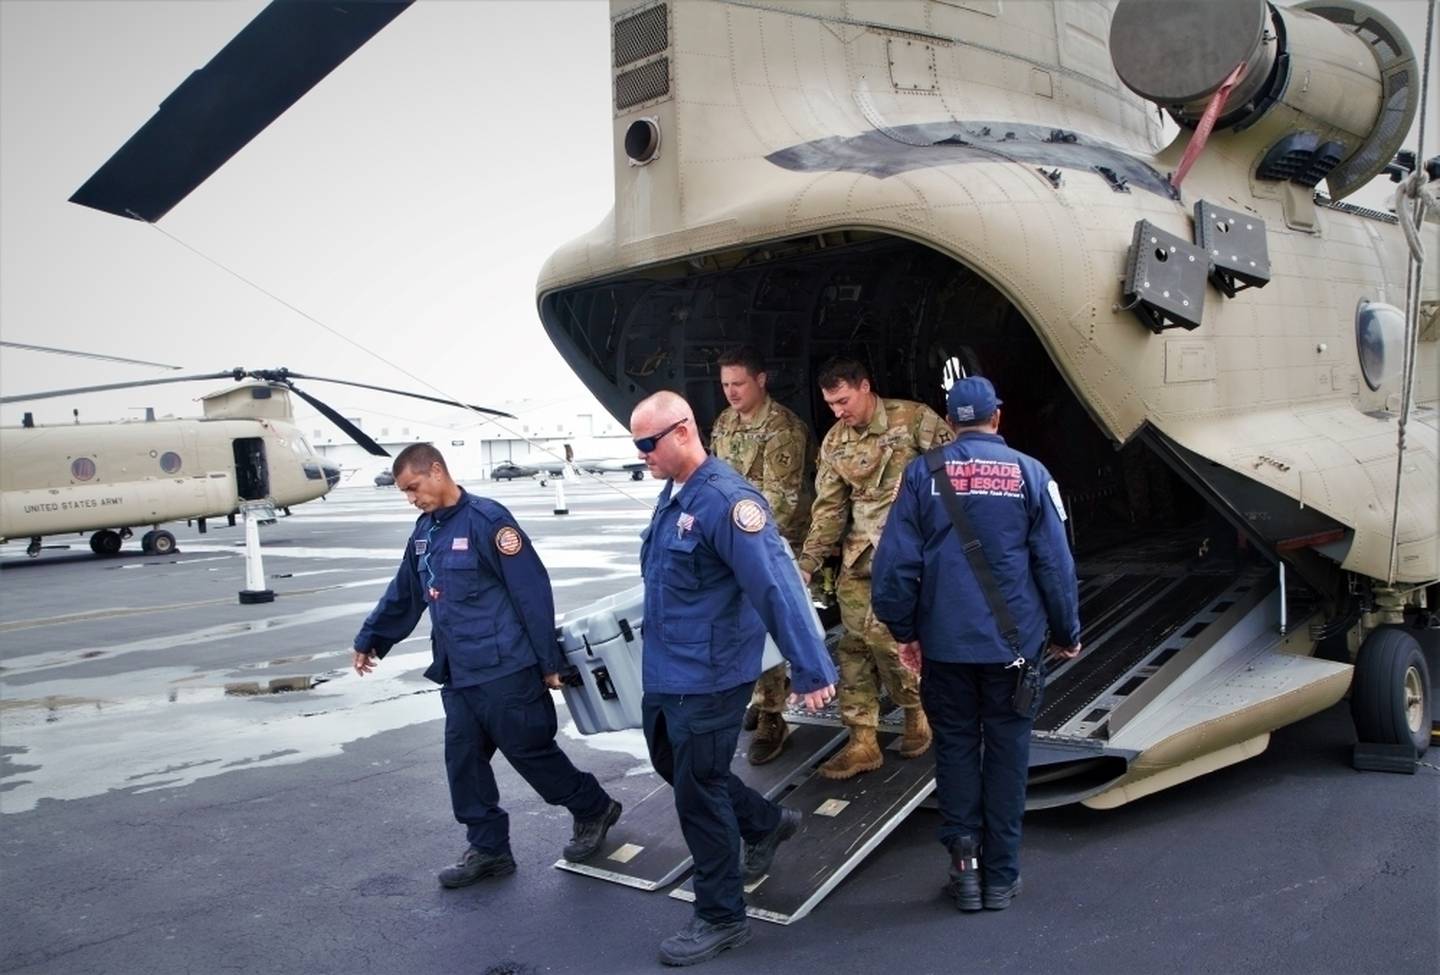 Soldiers practice loading and unloading operations on a CH-47F Chinook helicopter with helicopter search-and-rescue team members of Florida Task Force 1 at Opa-locka, Florida, on Sept. 28, 2022.